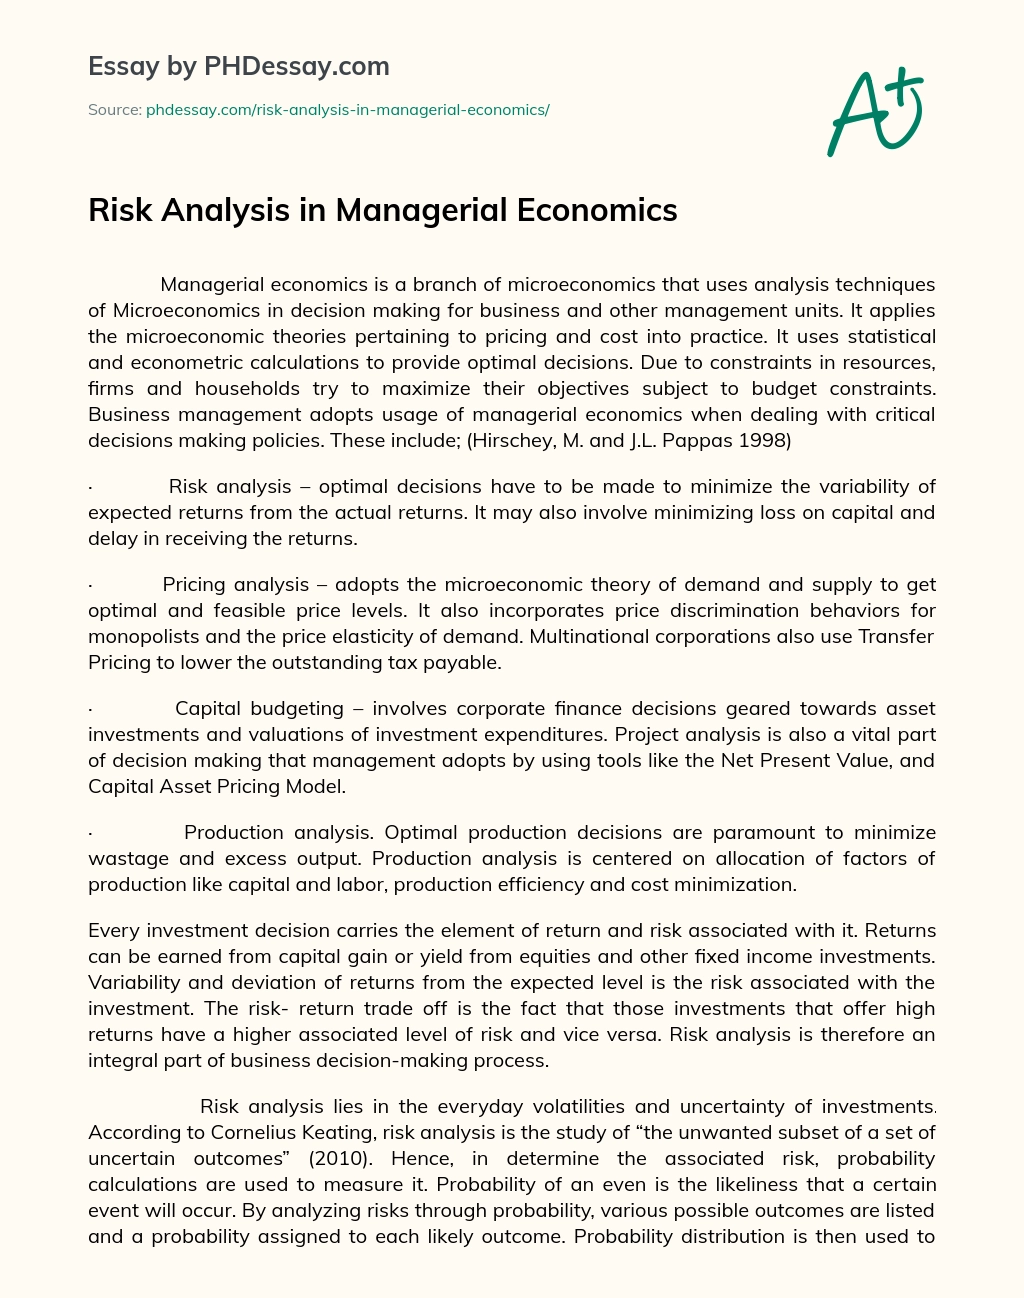 Risk Analysis in Managerial Economics essay